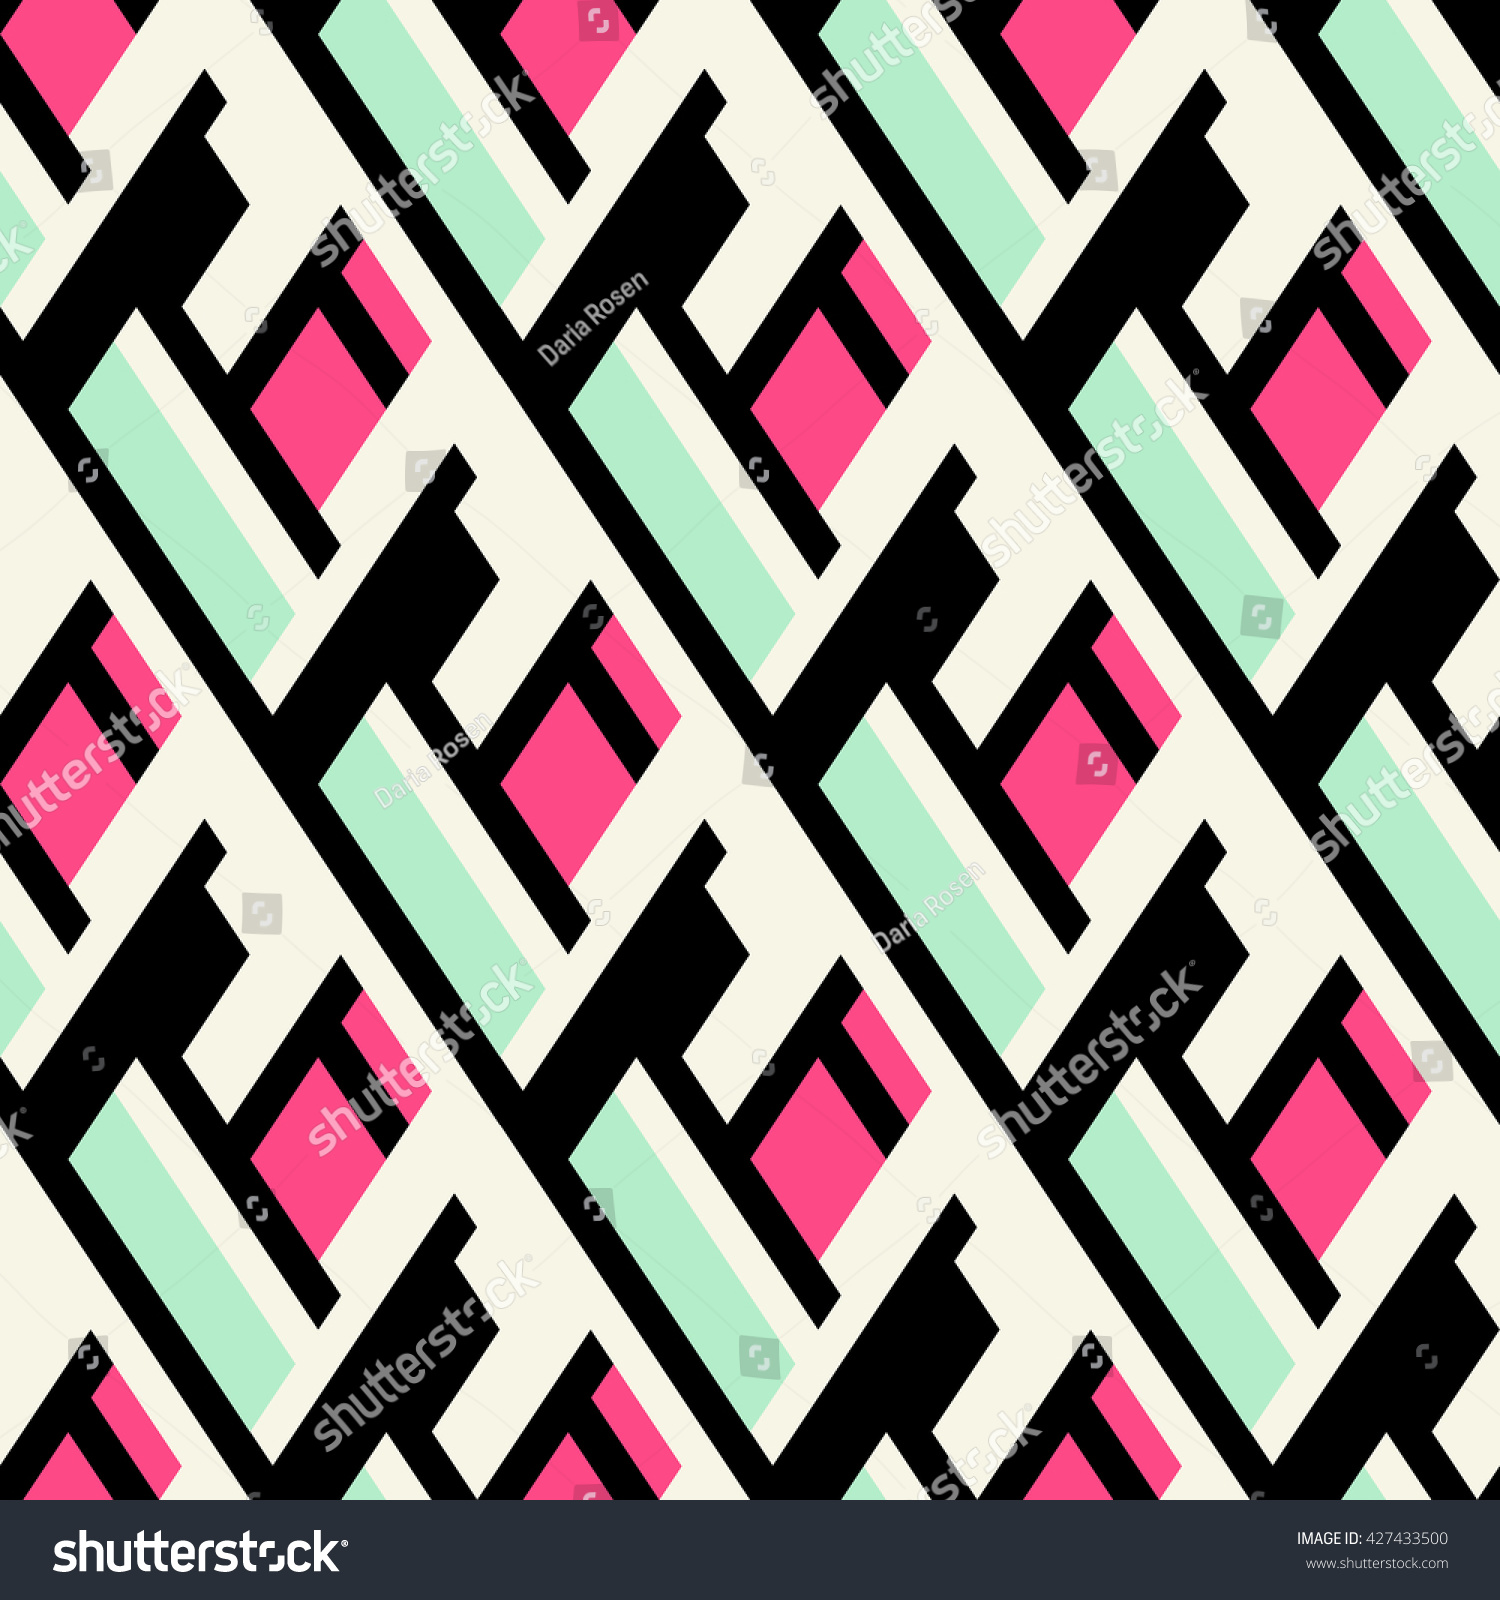 Vector Geometric Seamless Pattern With Lines, Overlapping Stripes, In ...